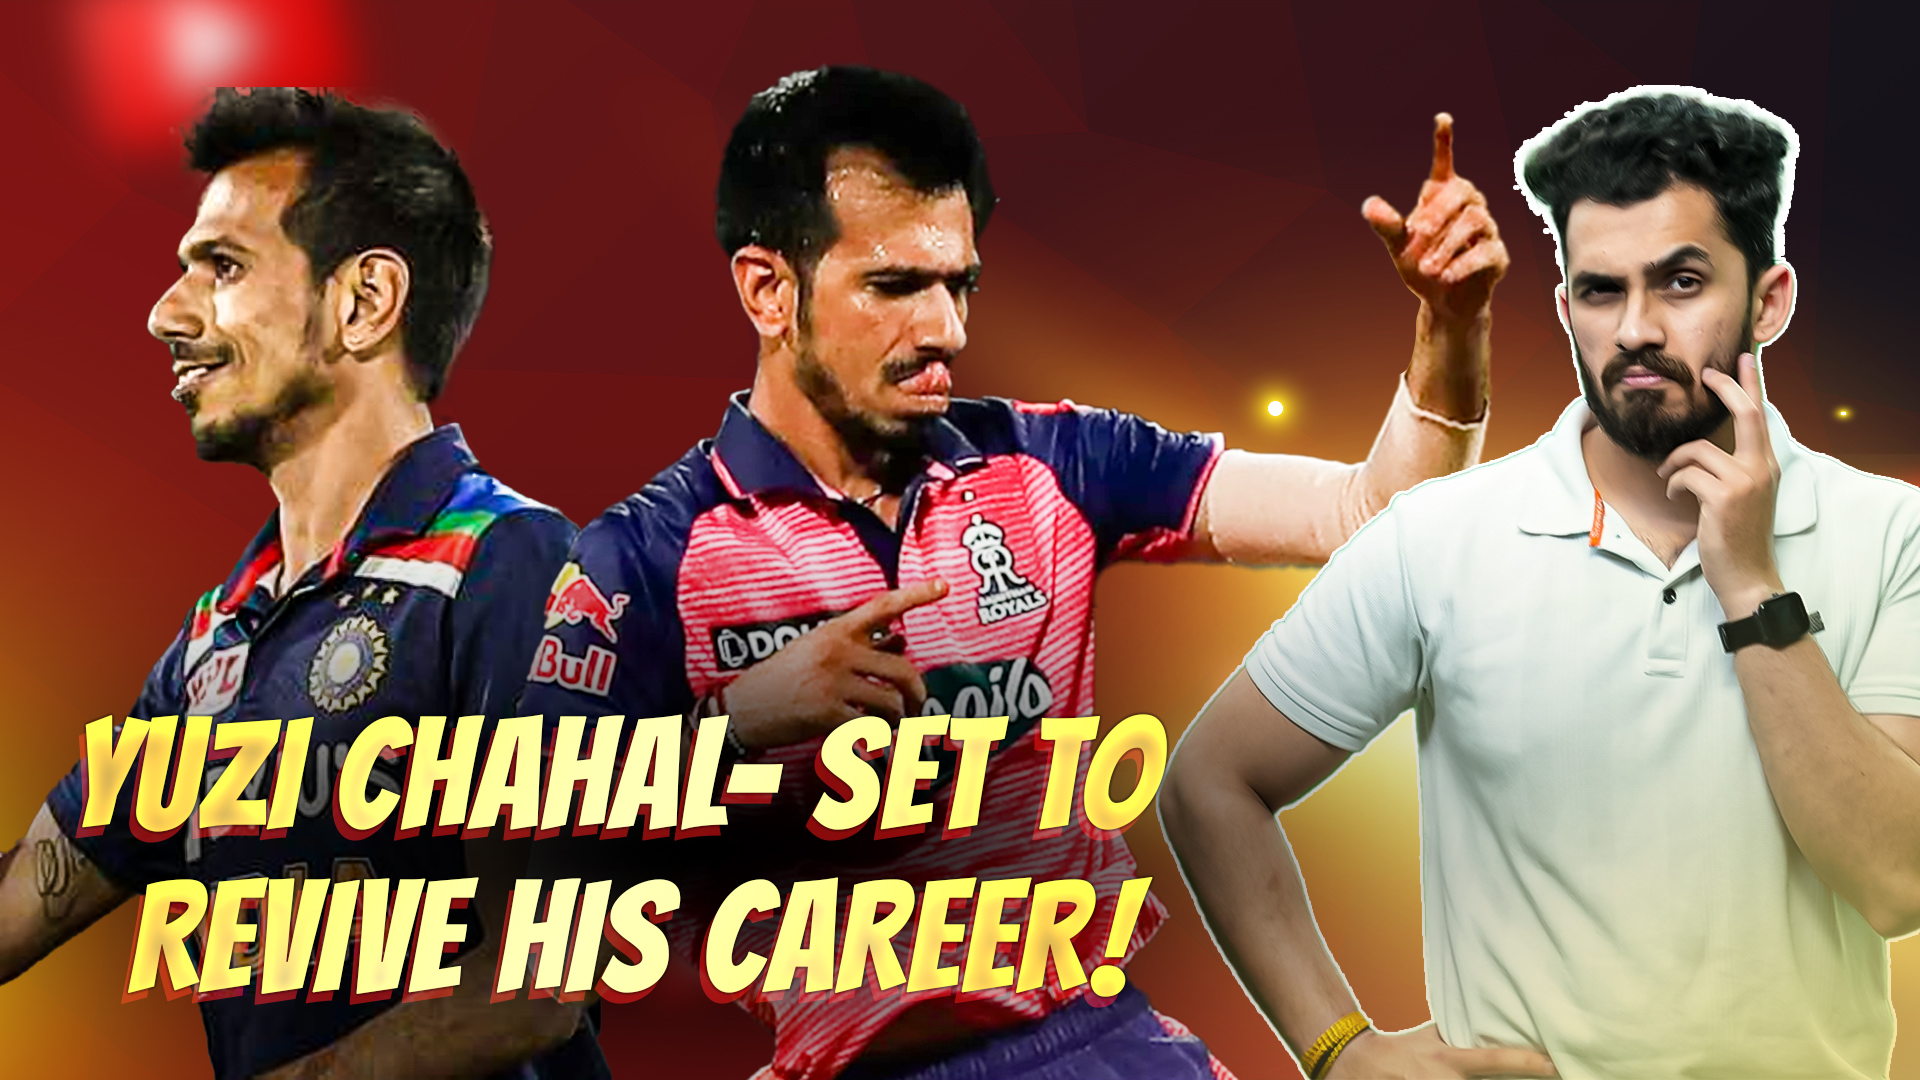 Chahal's career revival: T20WC bound